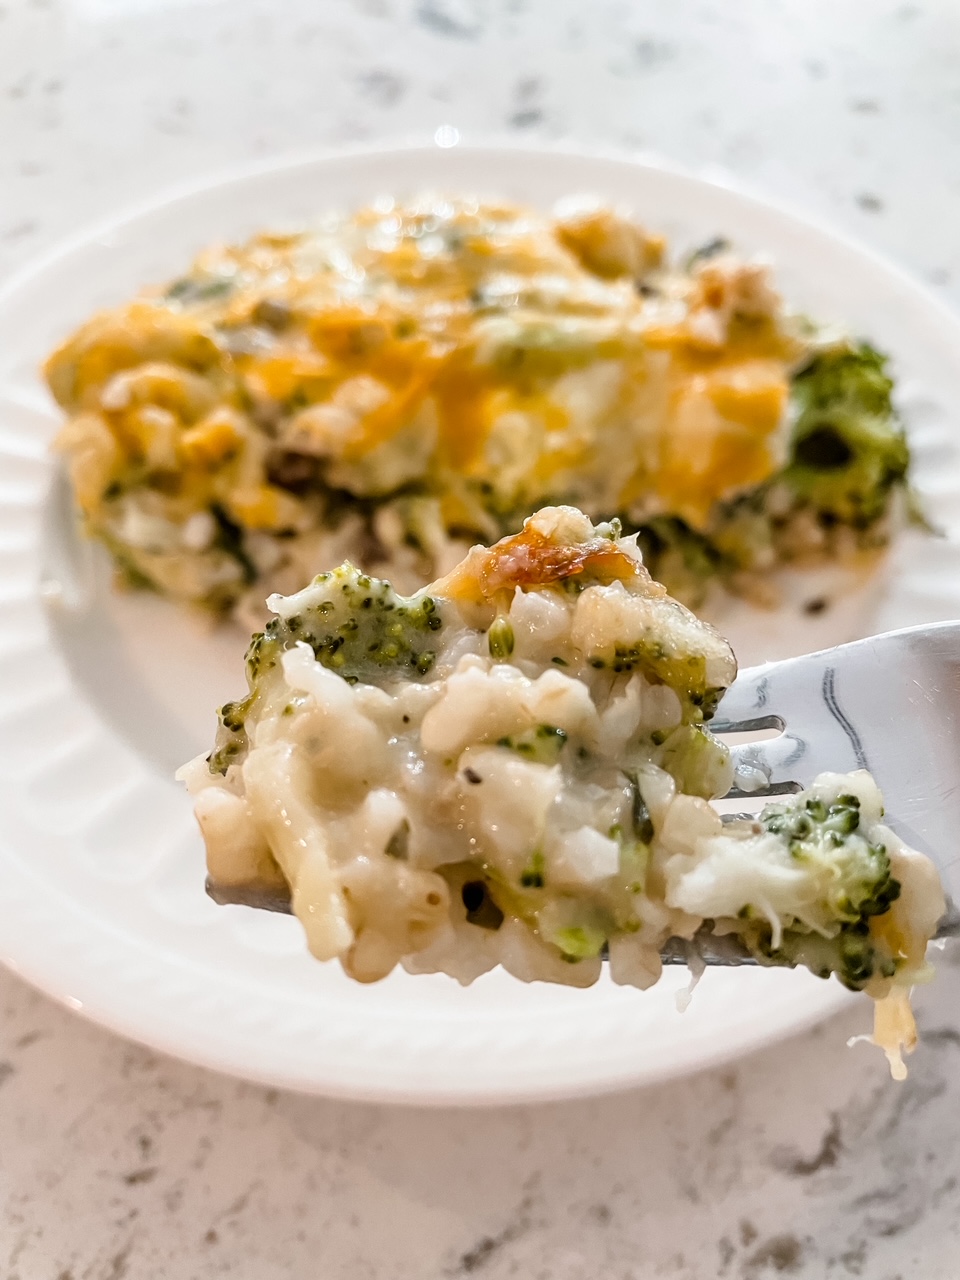 A fork lifting a bite of the Healthier Broccoli Rice Casserole with Chicken up